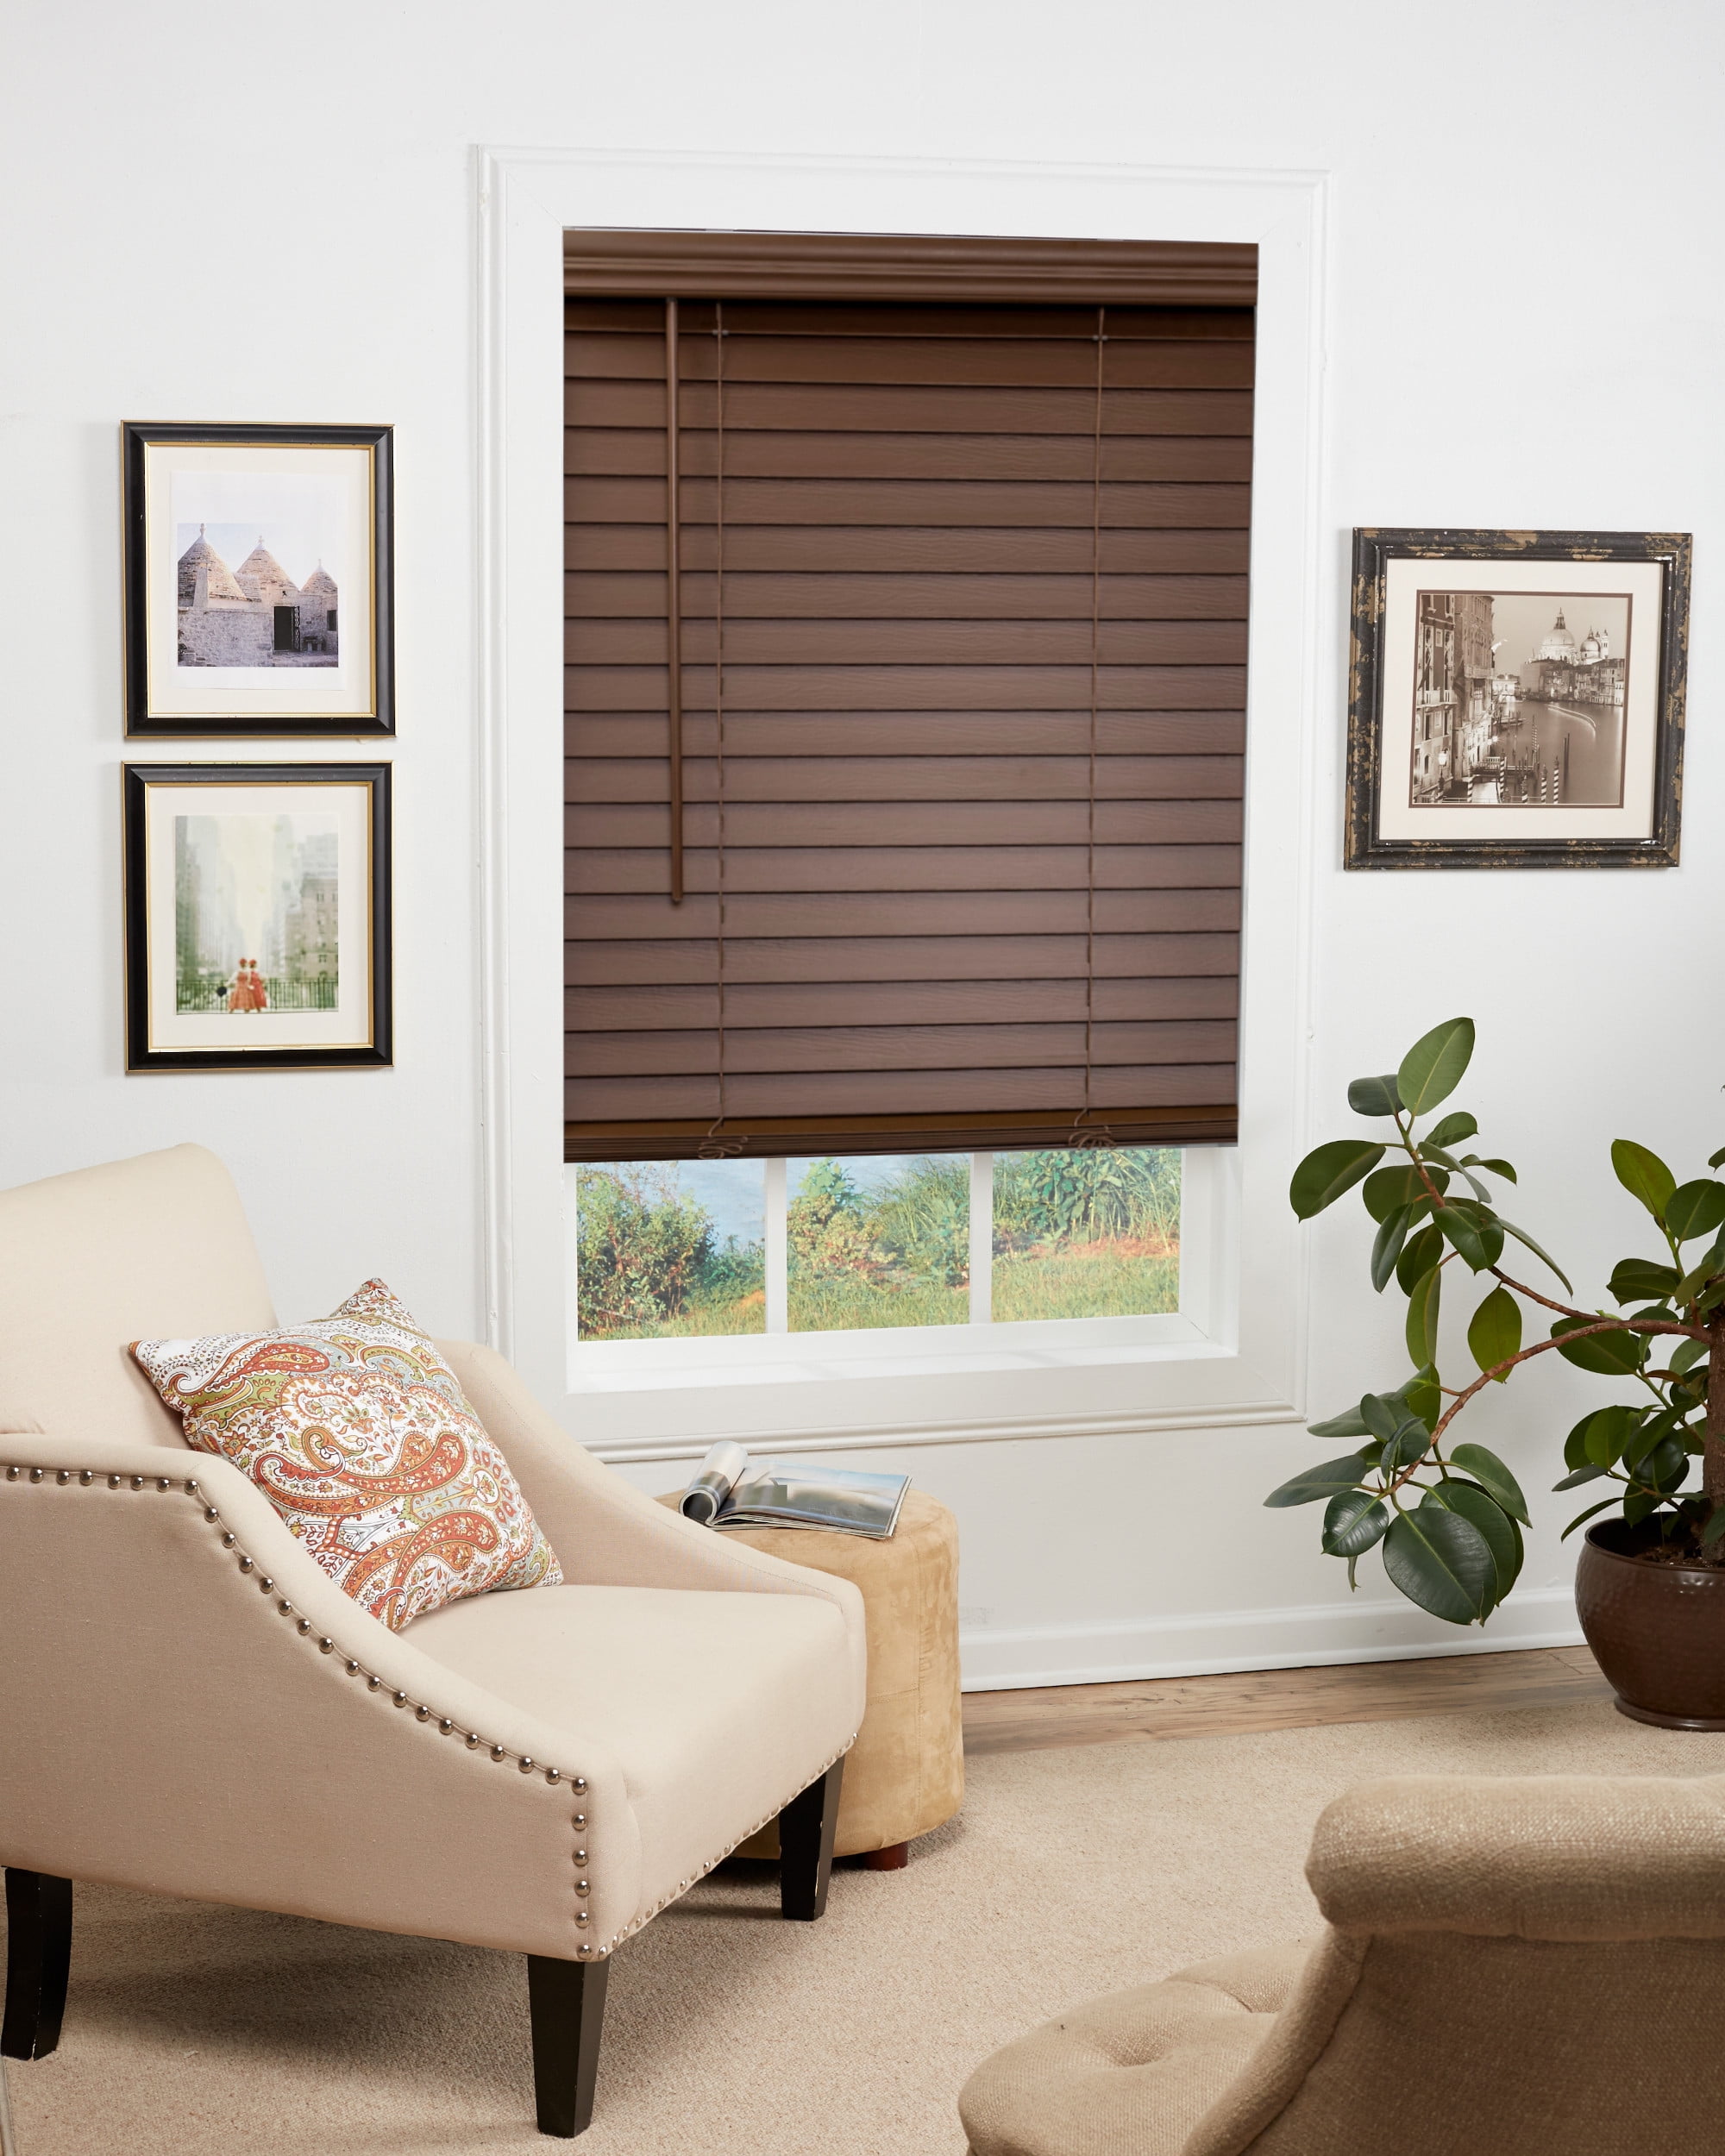 34.125 x 56.5 Wooden Blinds Brown 2 Inch wide 